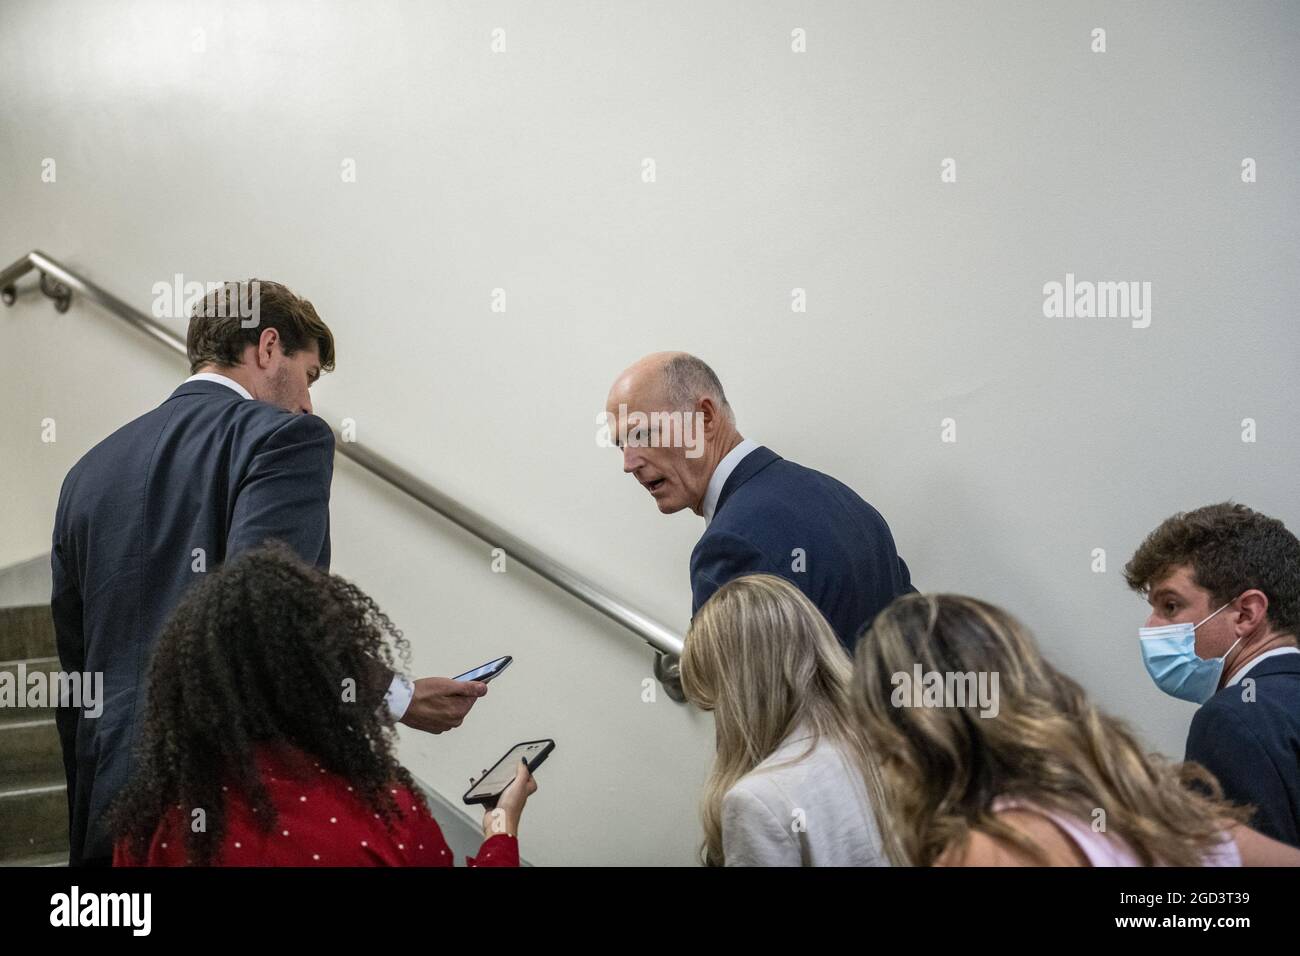 United States Senator Rick Scott (Republican of Florida) talks with reporters as he walks through the Senate subway during a vote at the US Capitol in Washington, DC, USA, Tuesday, August 10, 2021. The Senate is expected to vote today on final passage of the bipartisan $1 trillion H.R. 3684, Infrastructure Investment and Jobs Act. Photo by Rod Lamkey/CNP/ABACAPRESS.COM Stock Photo